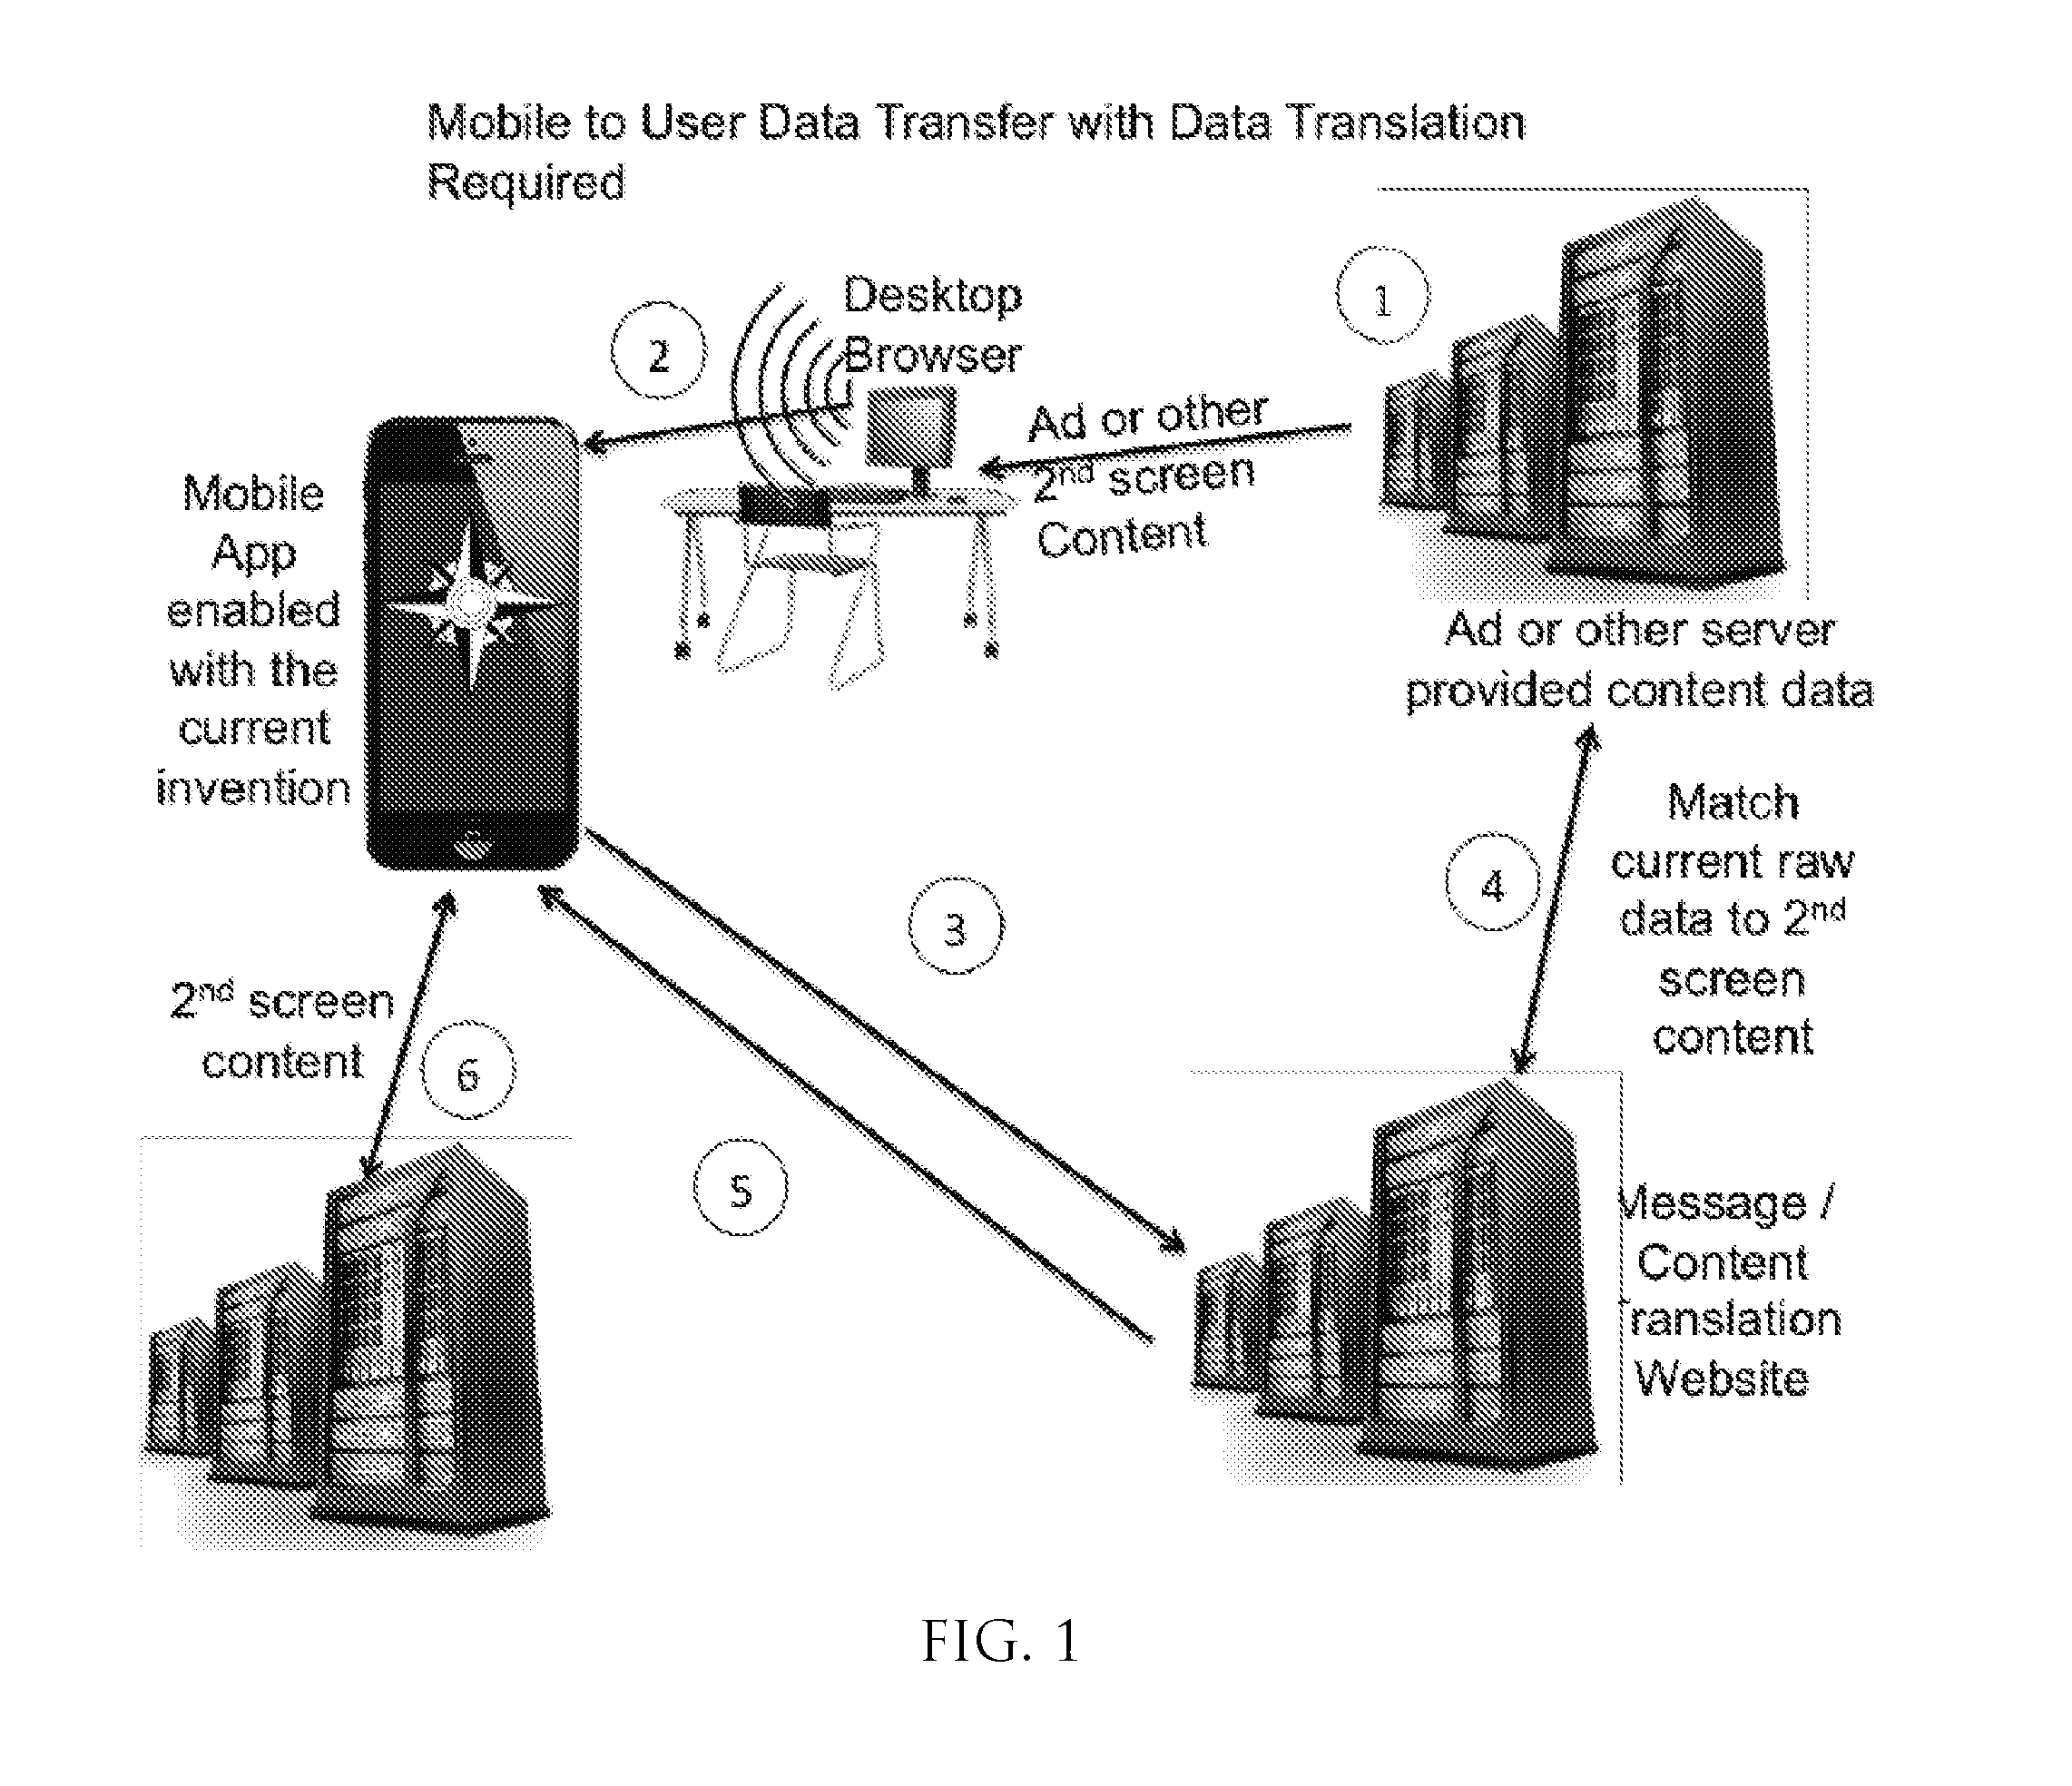 System and method of transferring dynamic data in real time through wireless, server-less communication between a immobile computing device and a mobile computing device